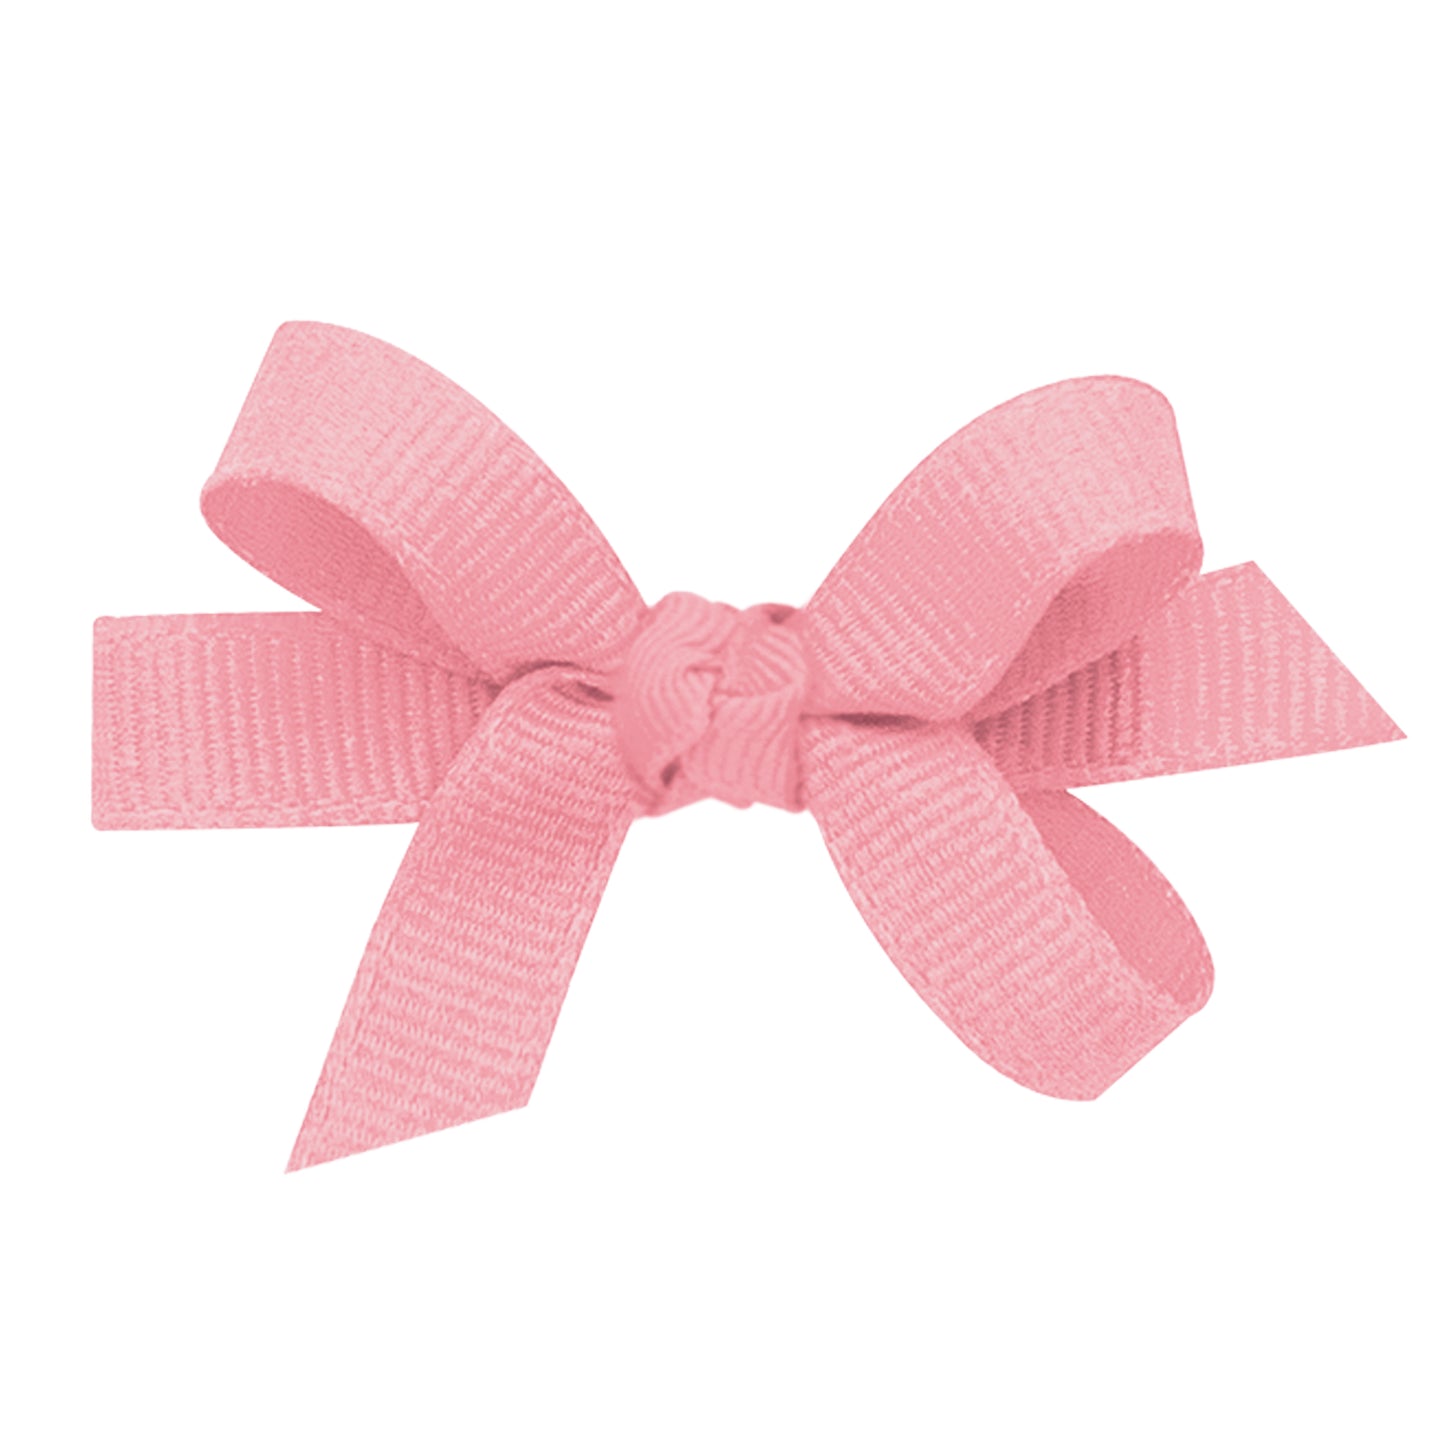 Wee Ones Sweet Baby Grosgrain Bow with Center Knot - Light Pink